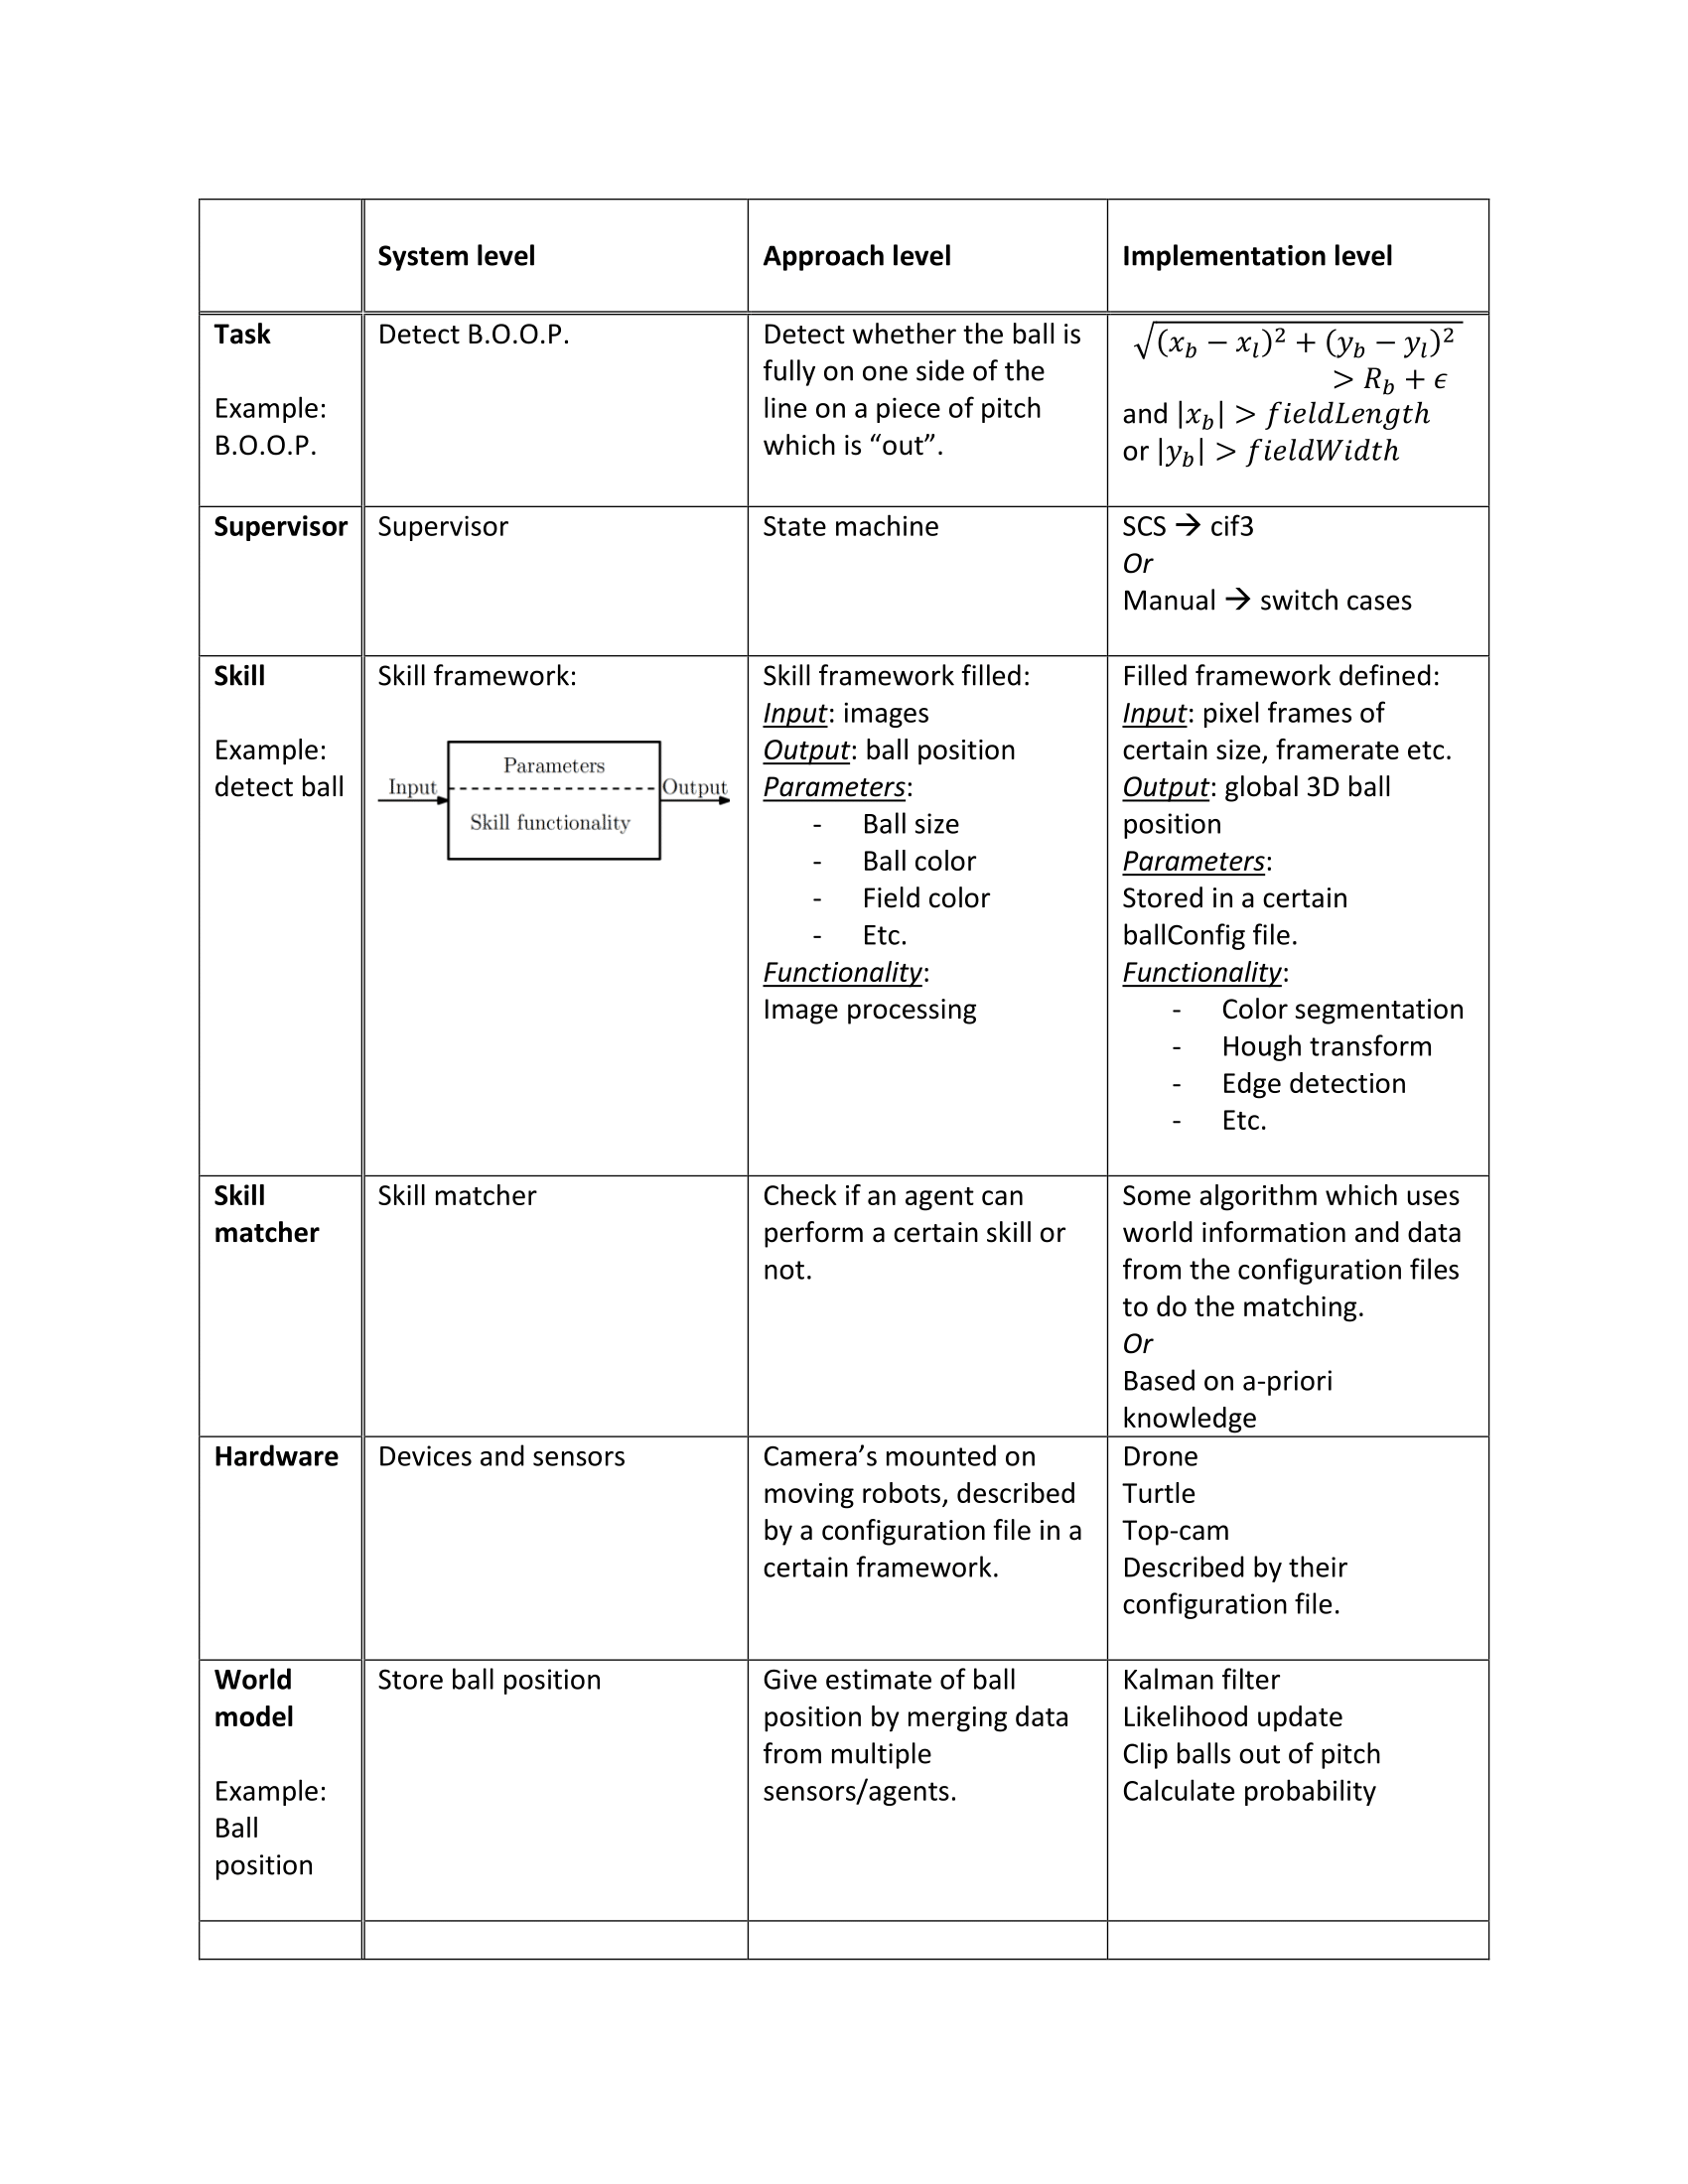 File:System levels table-1.png